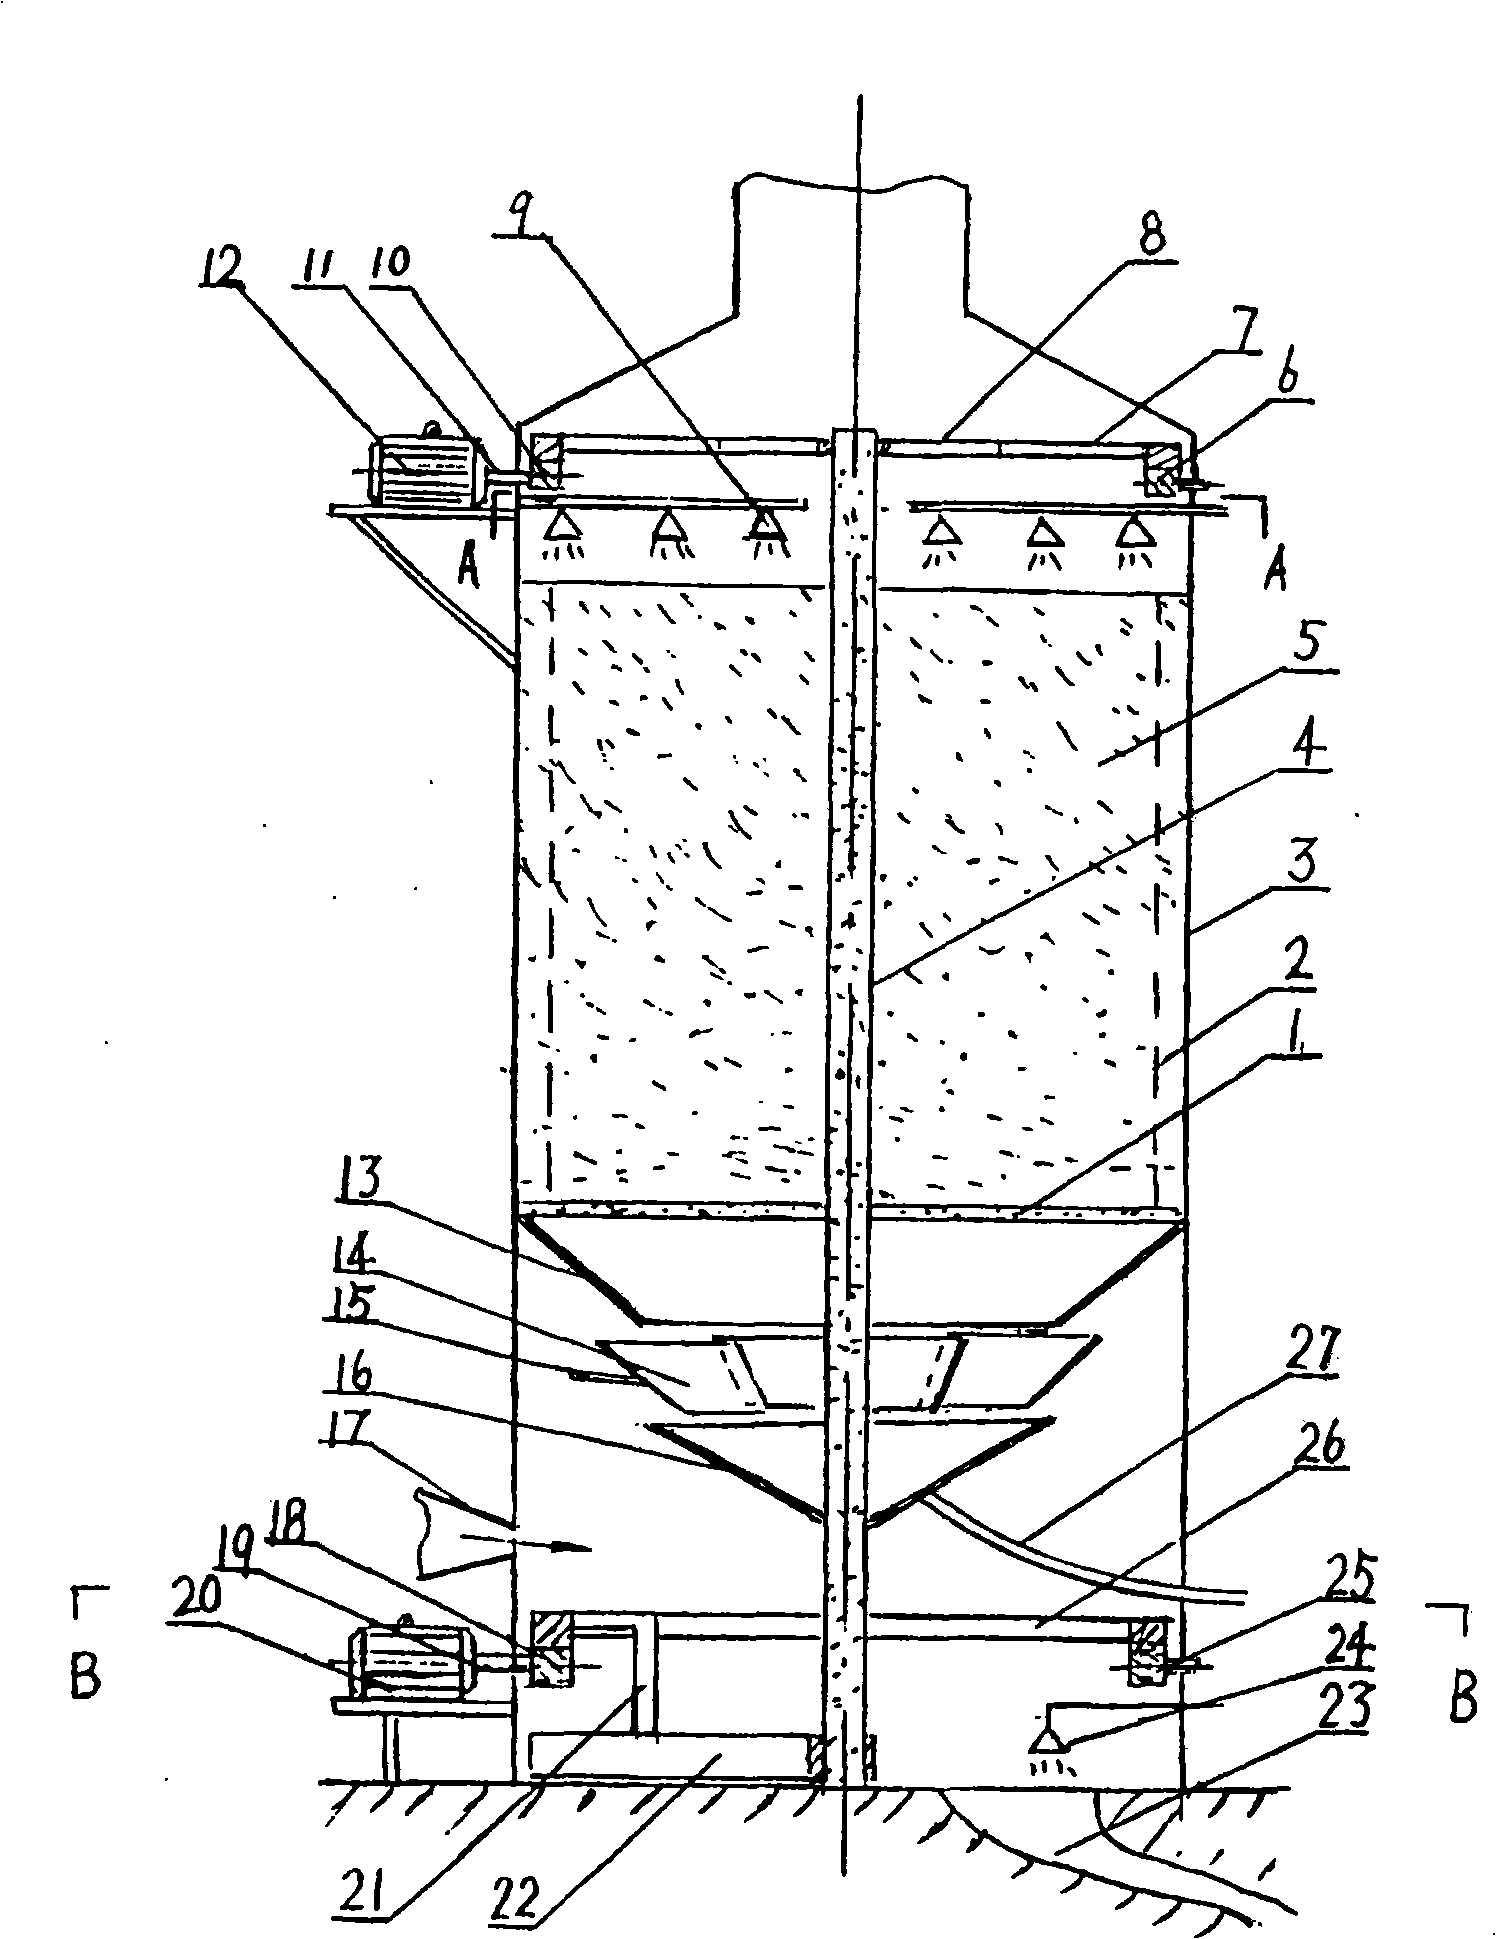 Active carbon flue gas desulfurizing reverse synchronous work tower